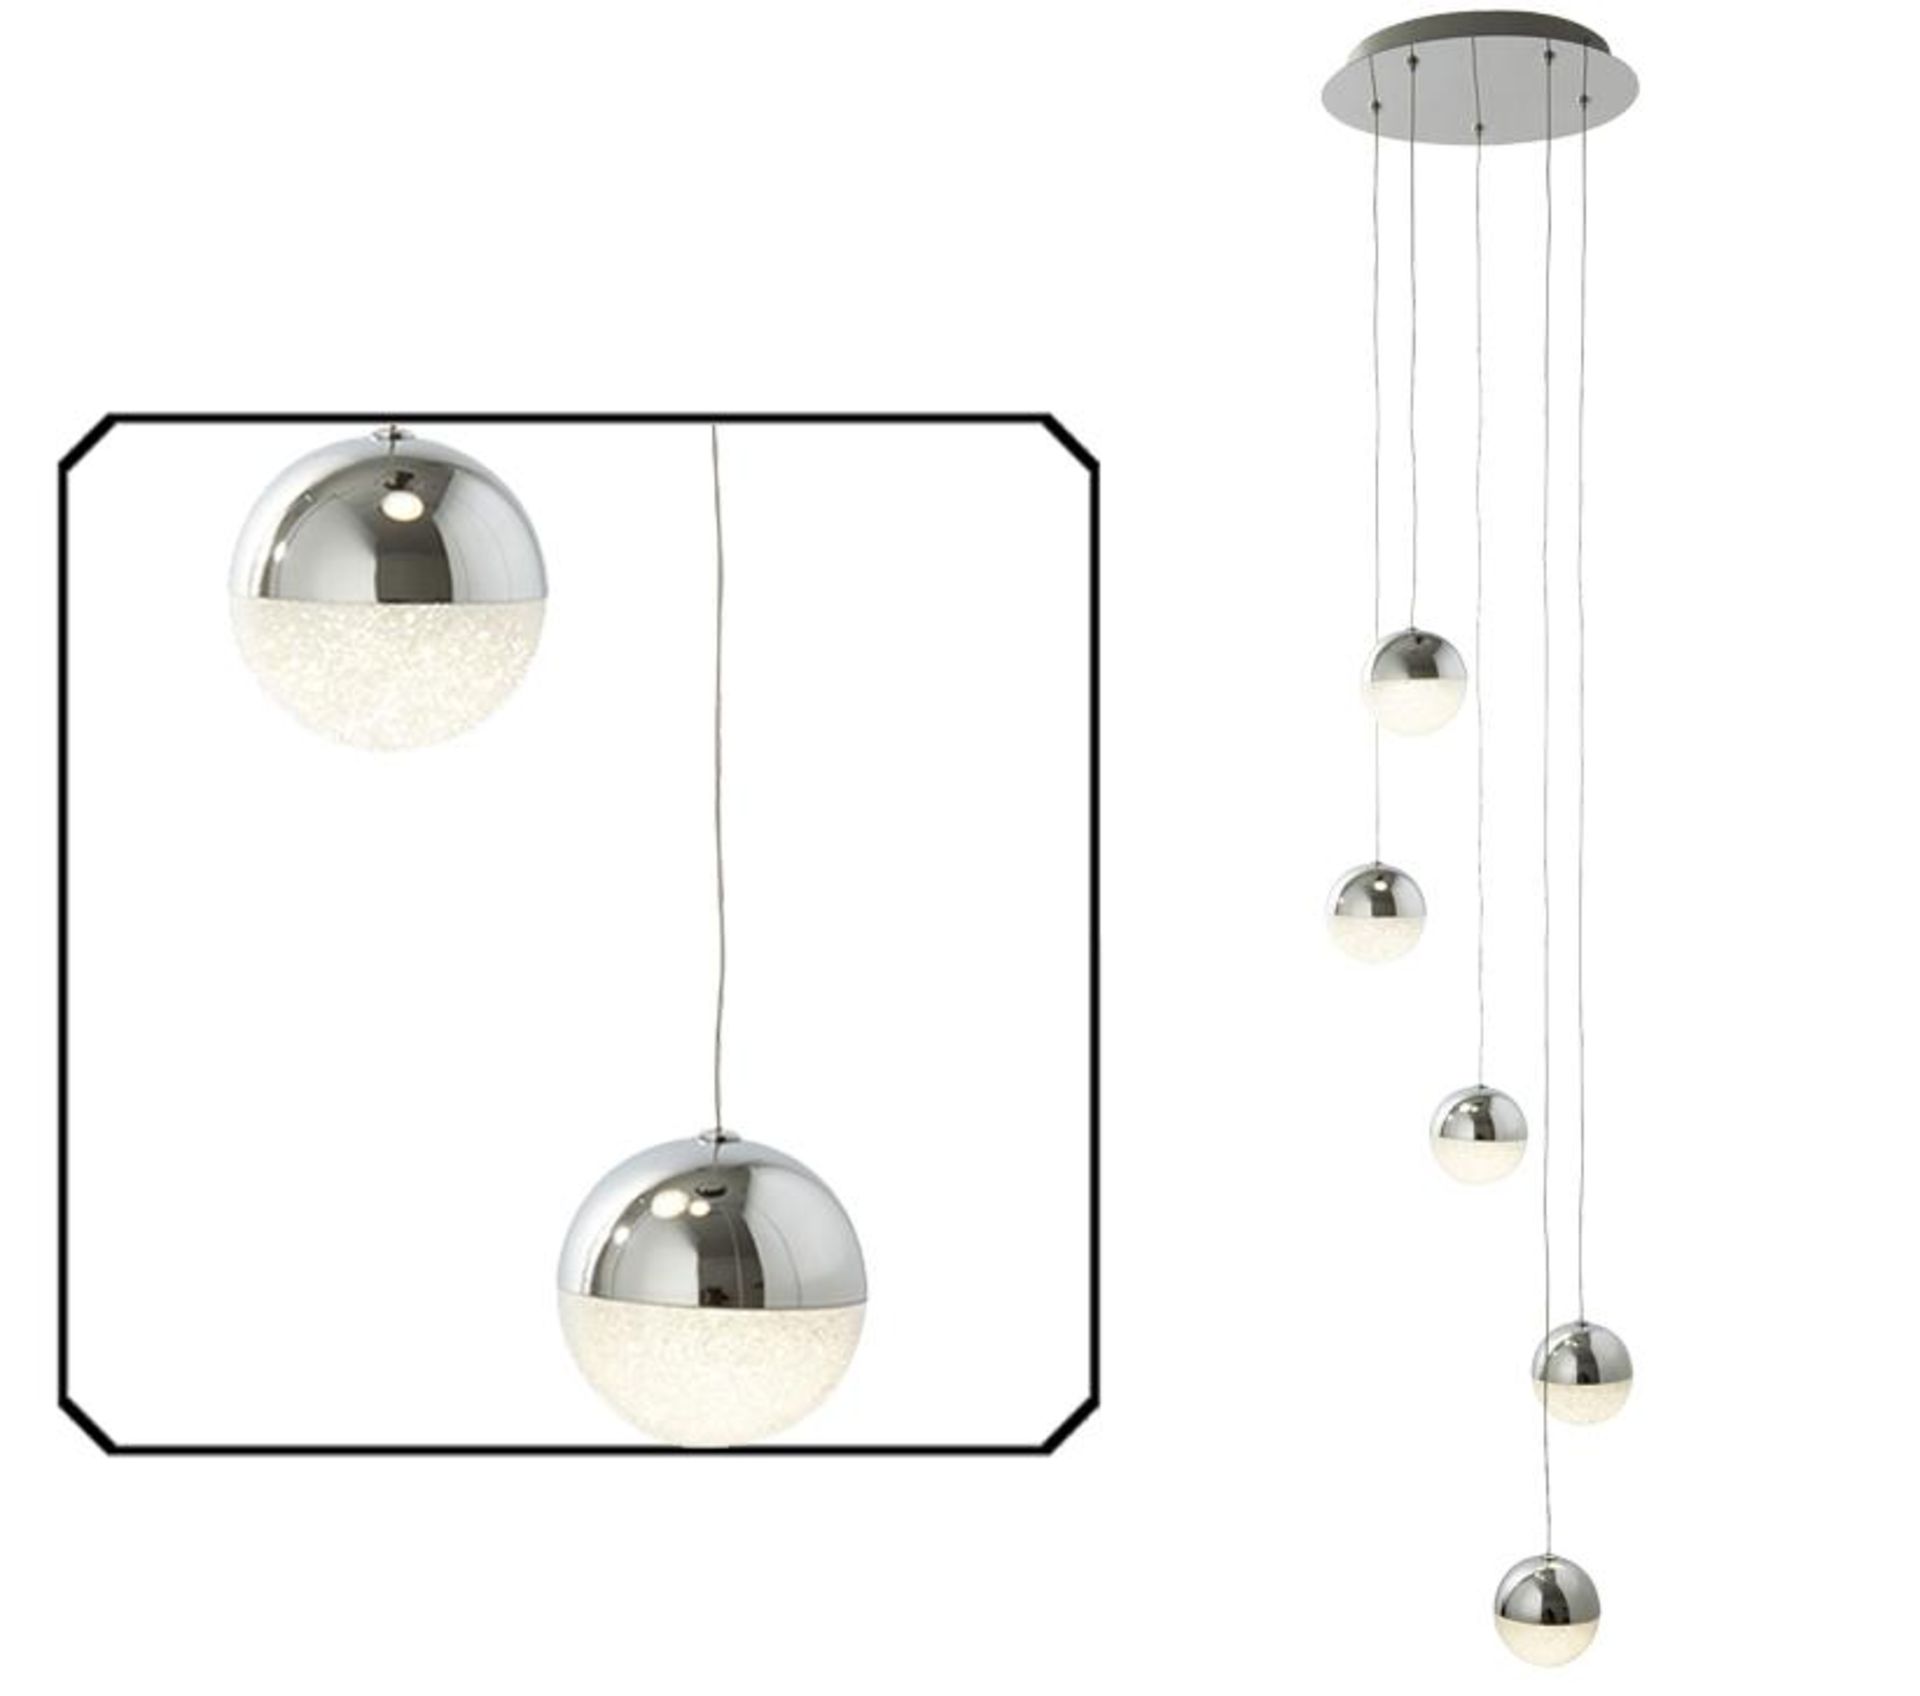 1 x Iceball LED Chrome 5 Light Multi-drop Pendant With Bubbleglass - New Boxed Stock - CL323 - Ref: - Image 2 of 2